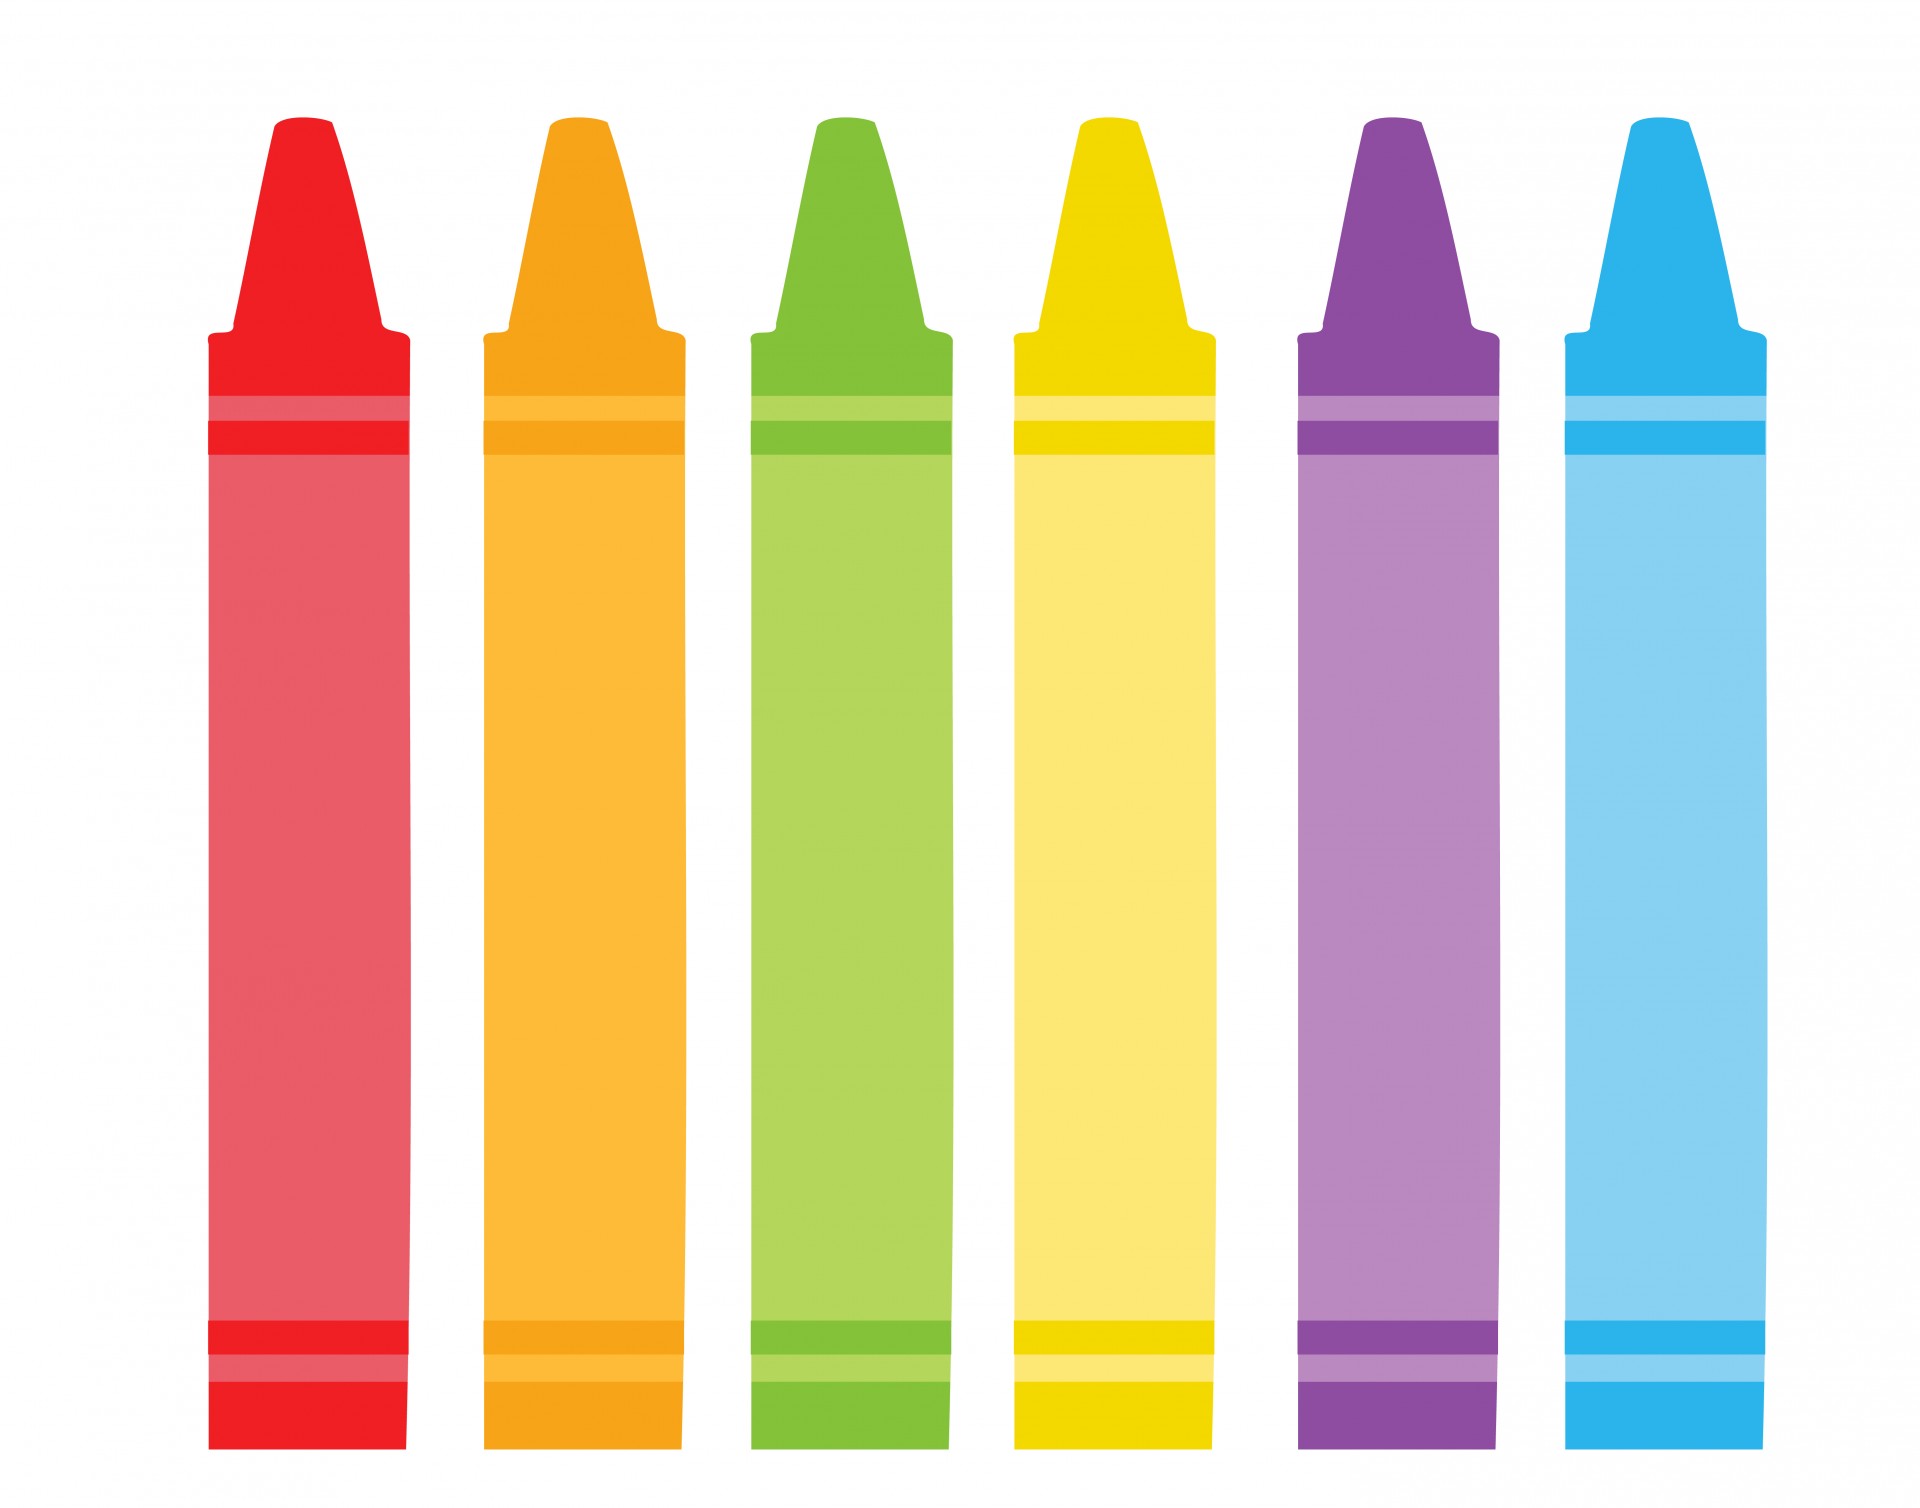 Color crayons clipart